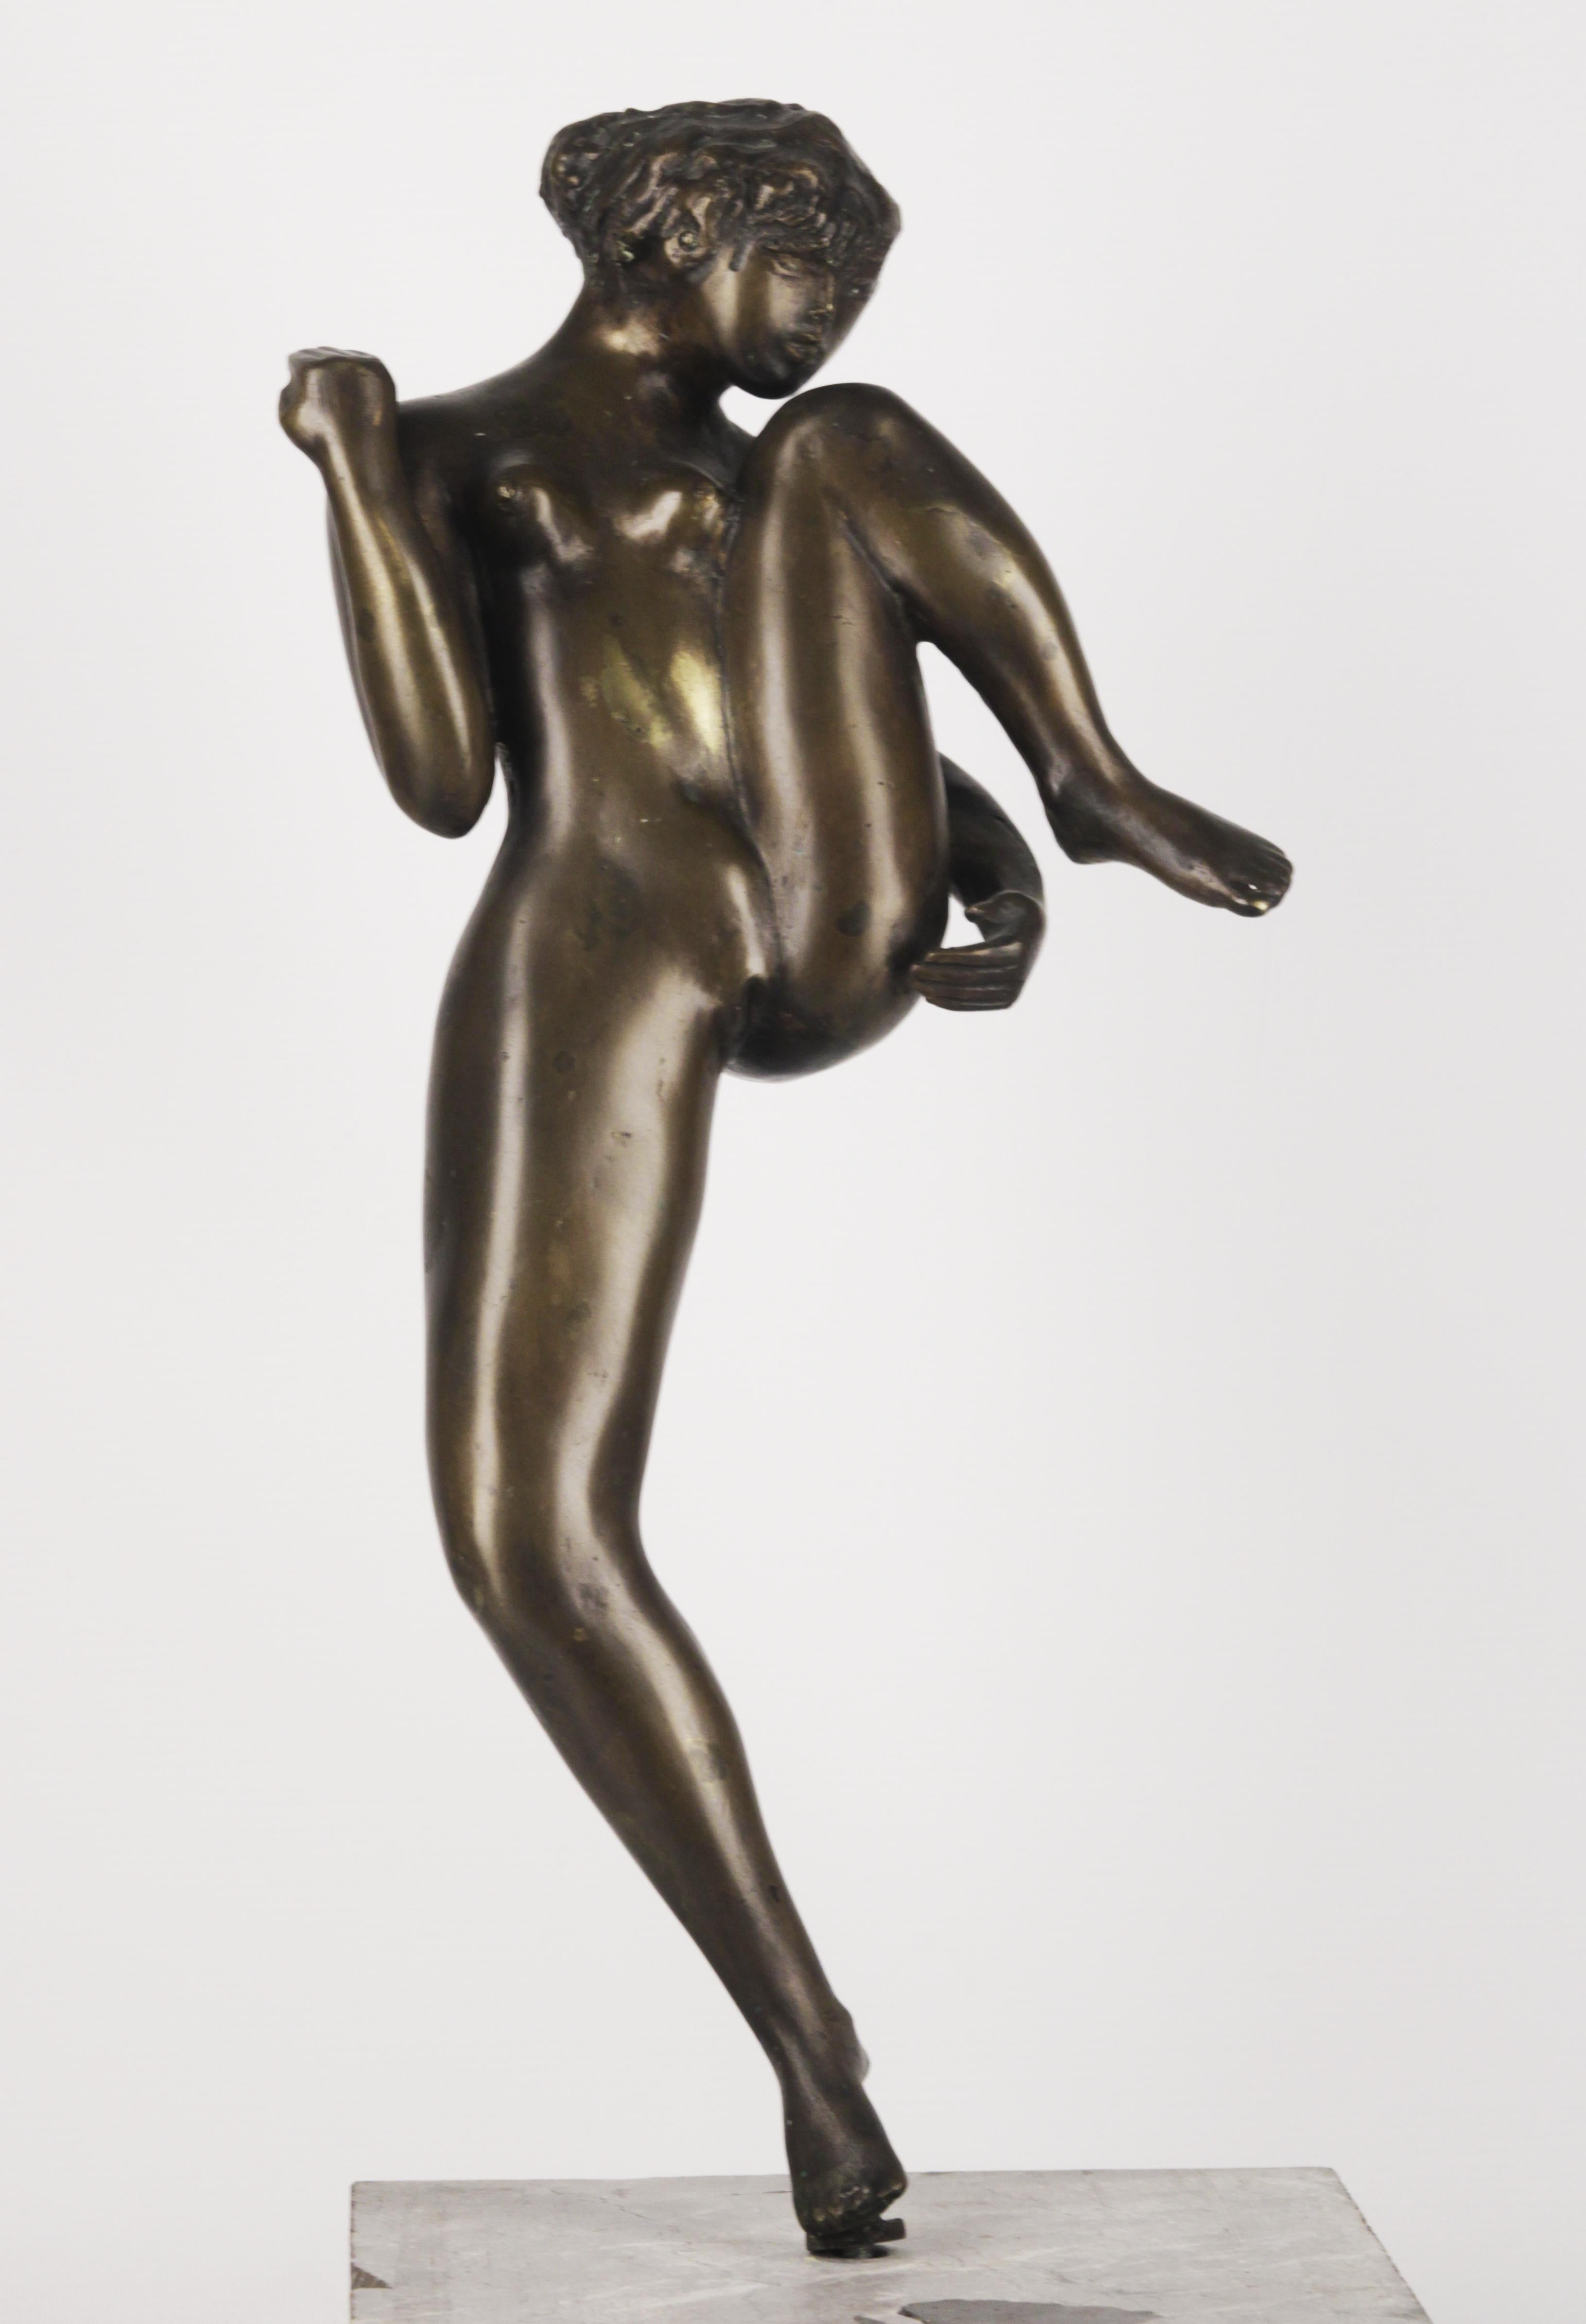 20th century bronze figurative sculpture of a nude woman by argentine sculptor José Mariano Pagés

By: José Mariano Pagés
Material: bronze, copper, metal
Technique: cast, patinated, polished, metalwork, molded, patinated
Dimensions: 8 in x 9.5 x 21